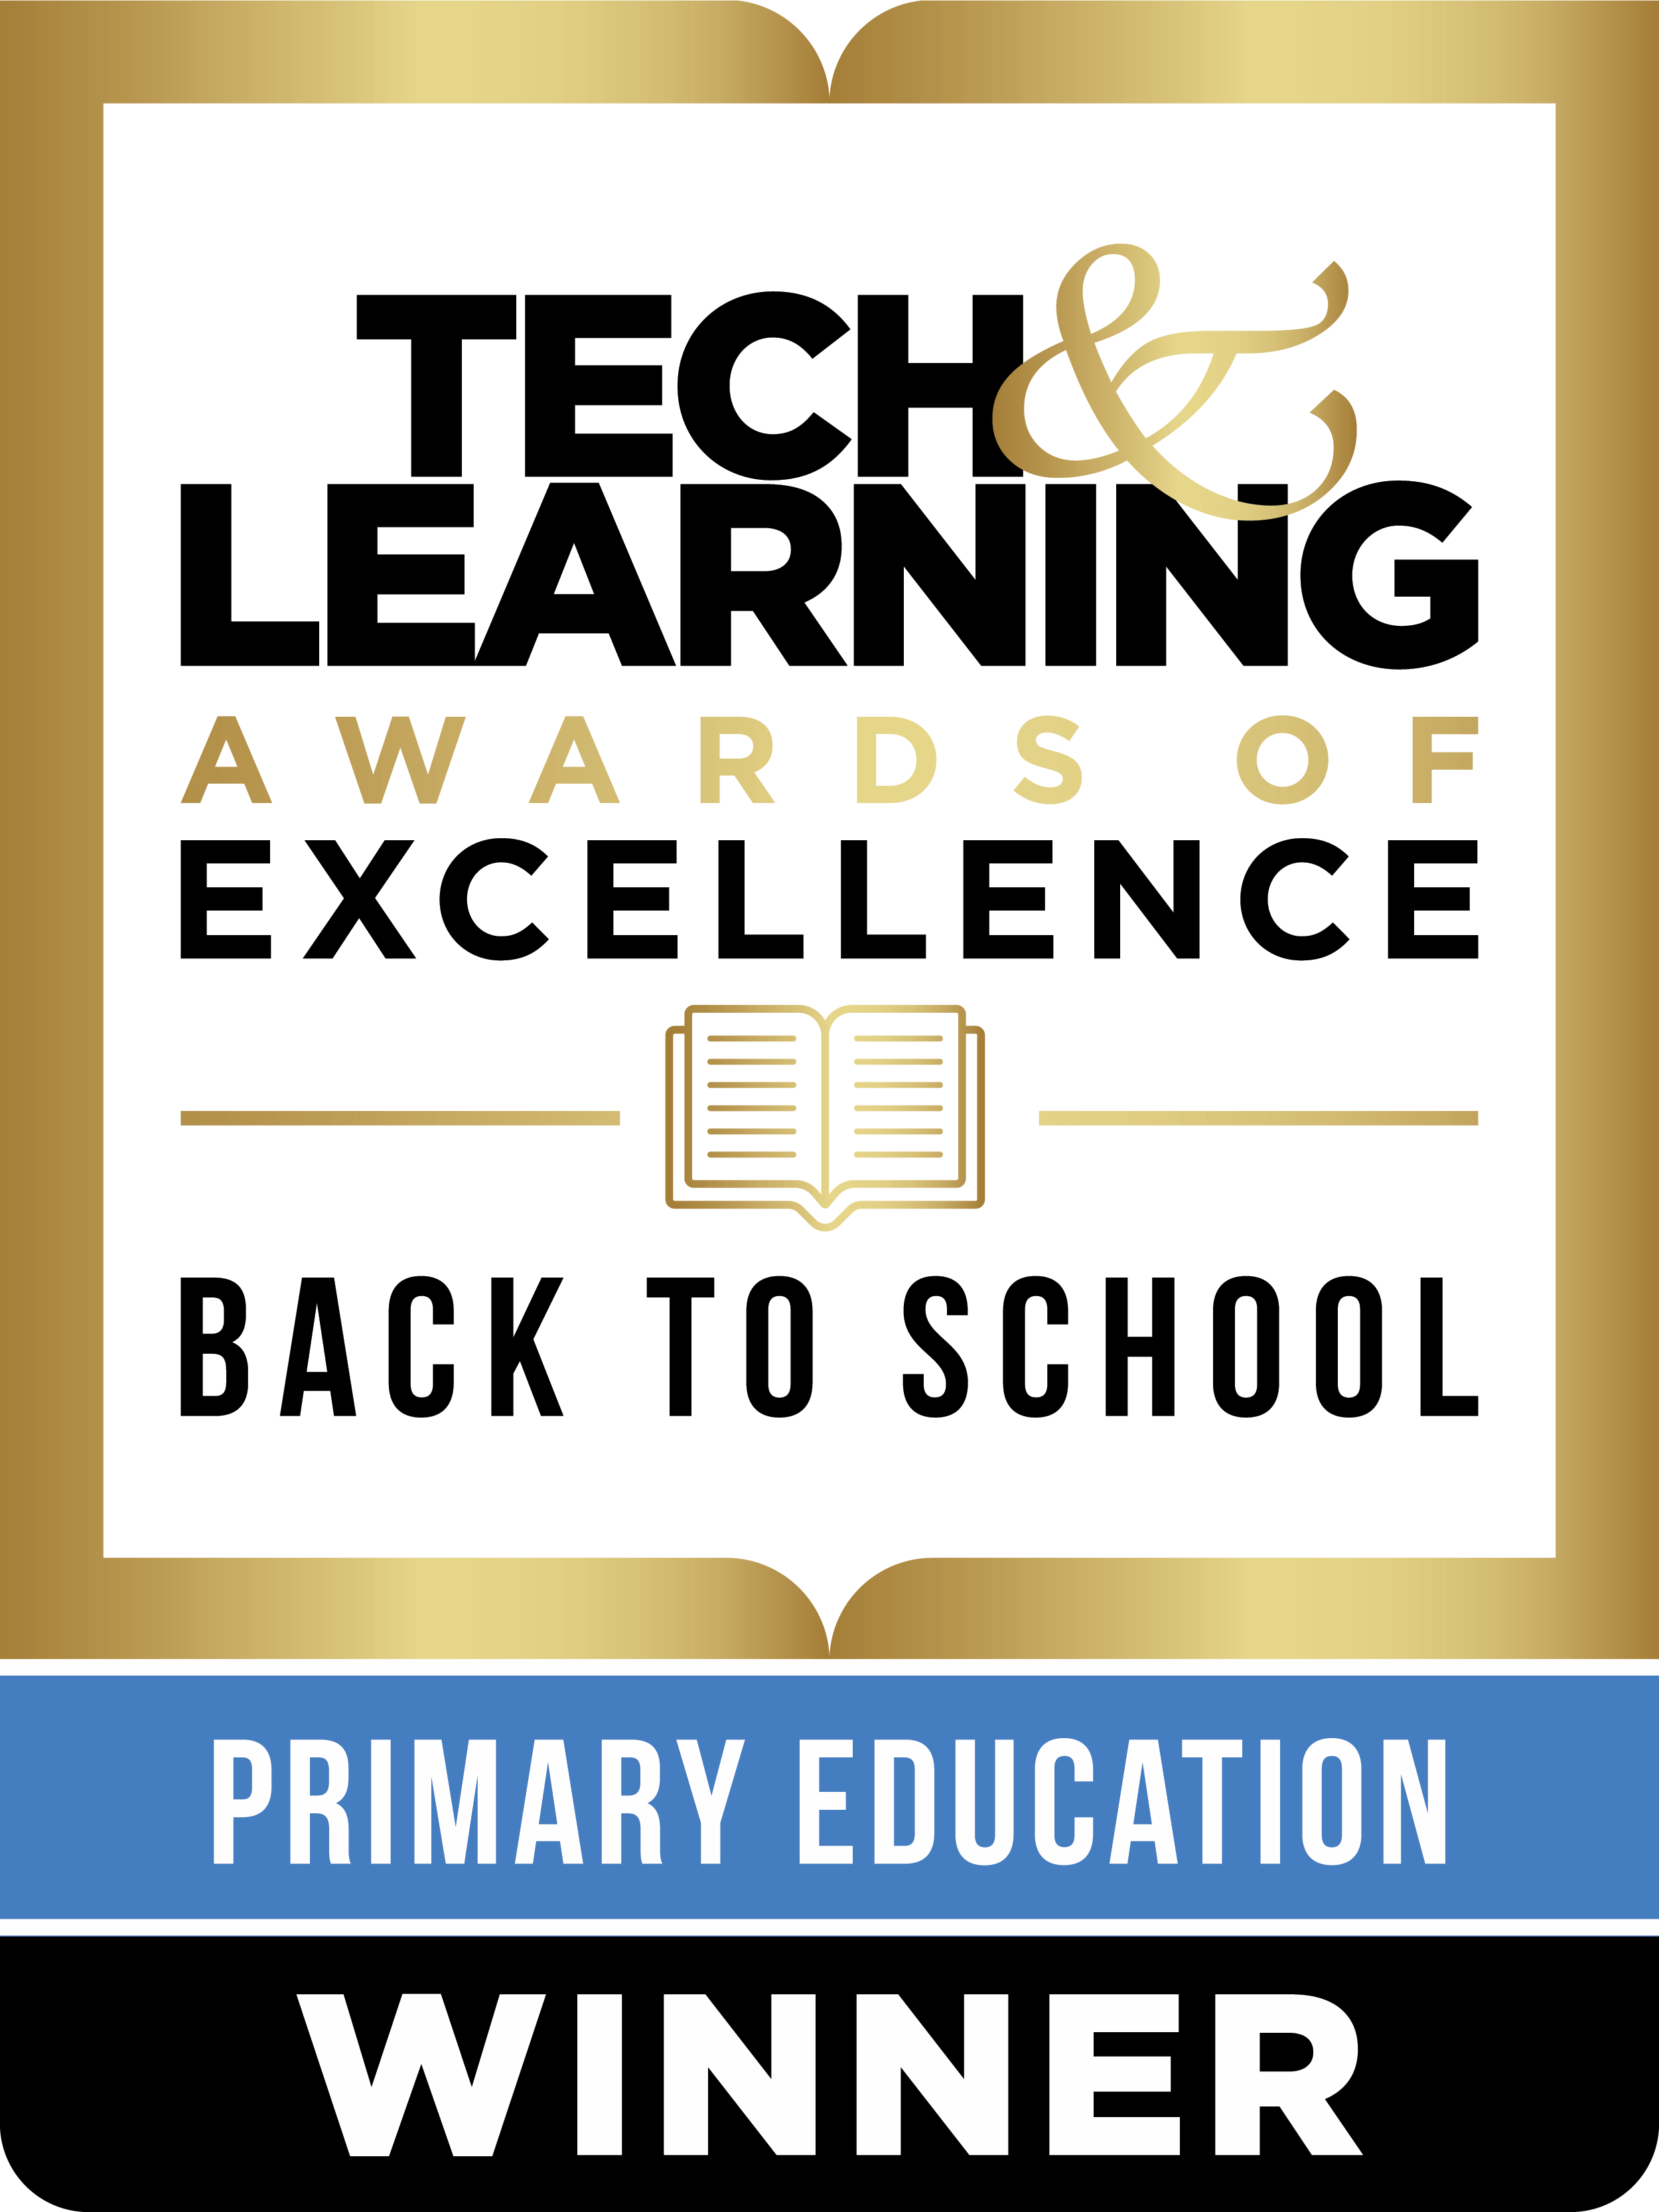 Tech & Learning Awards of Excellence<br> Back to School - Primary Education